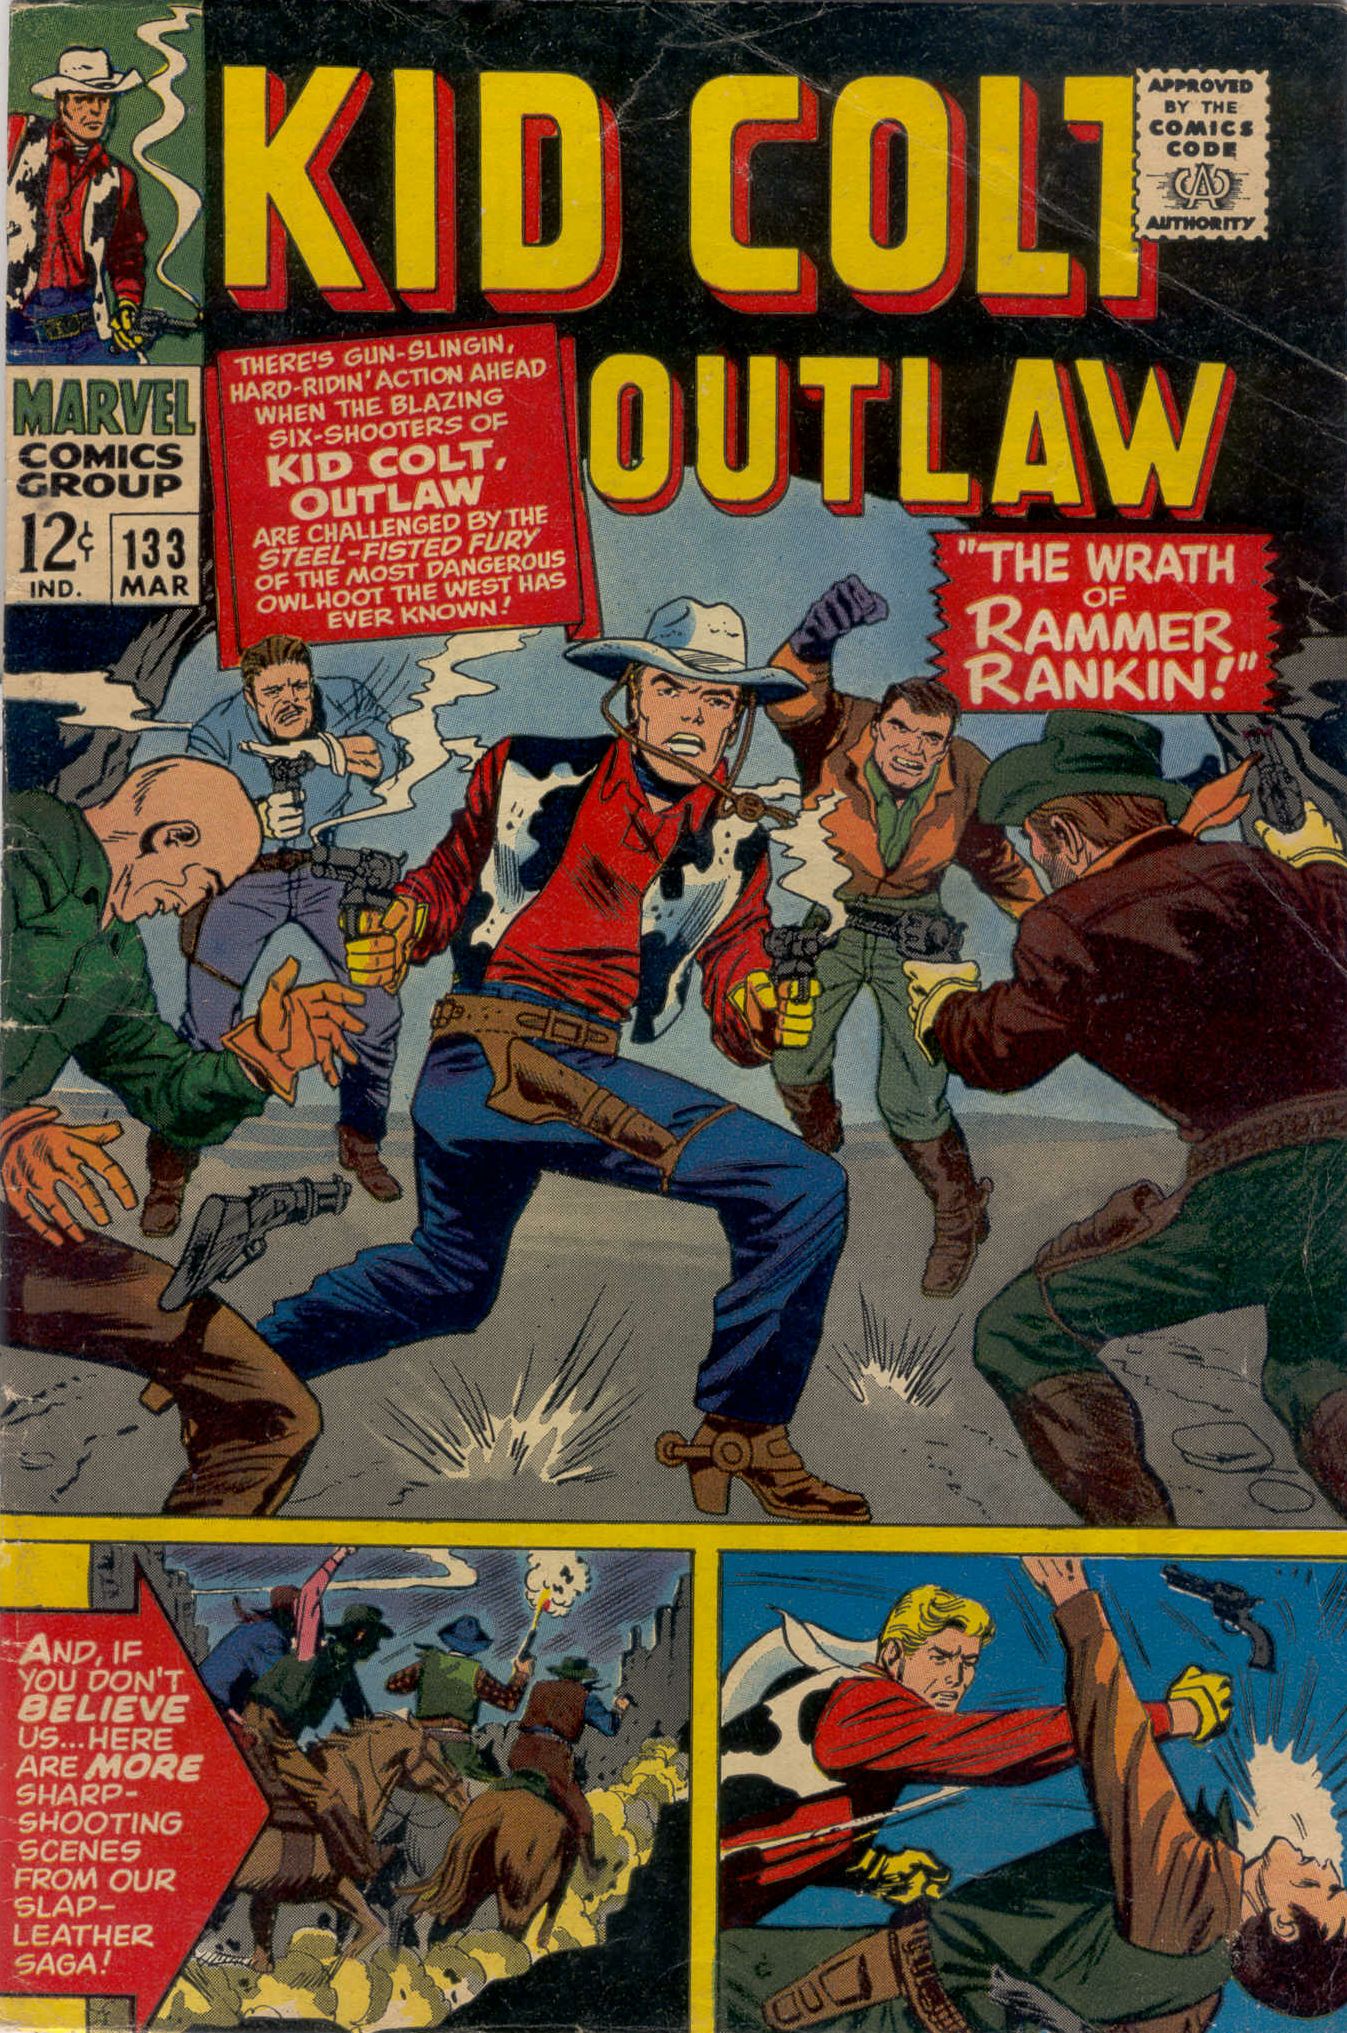 Read online Kid Colt Outlaw comic -  Issue #133 - 1